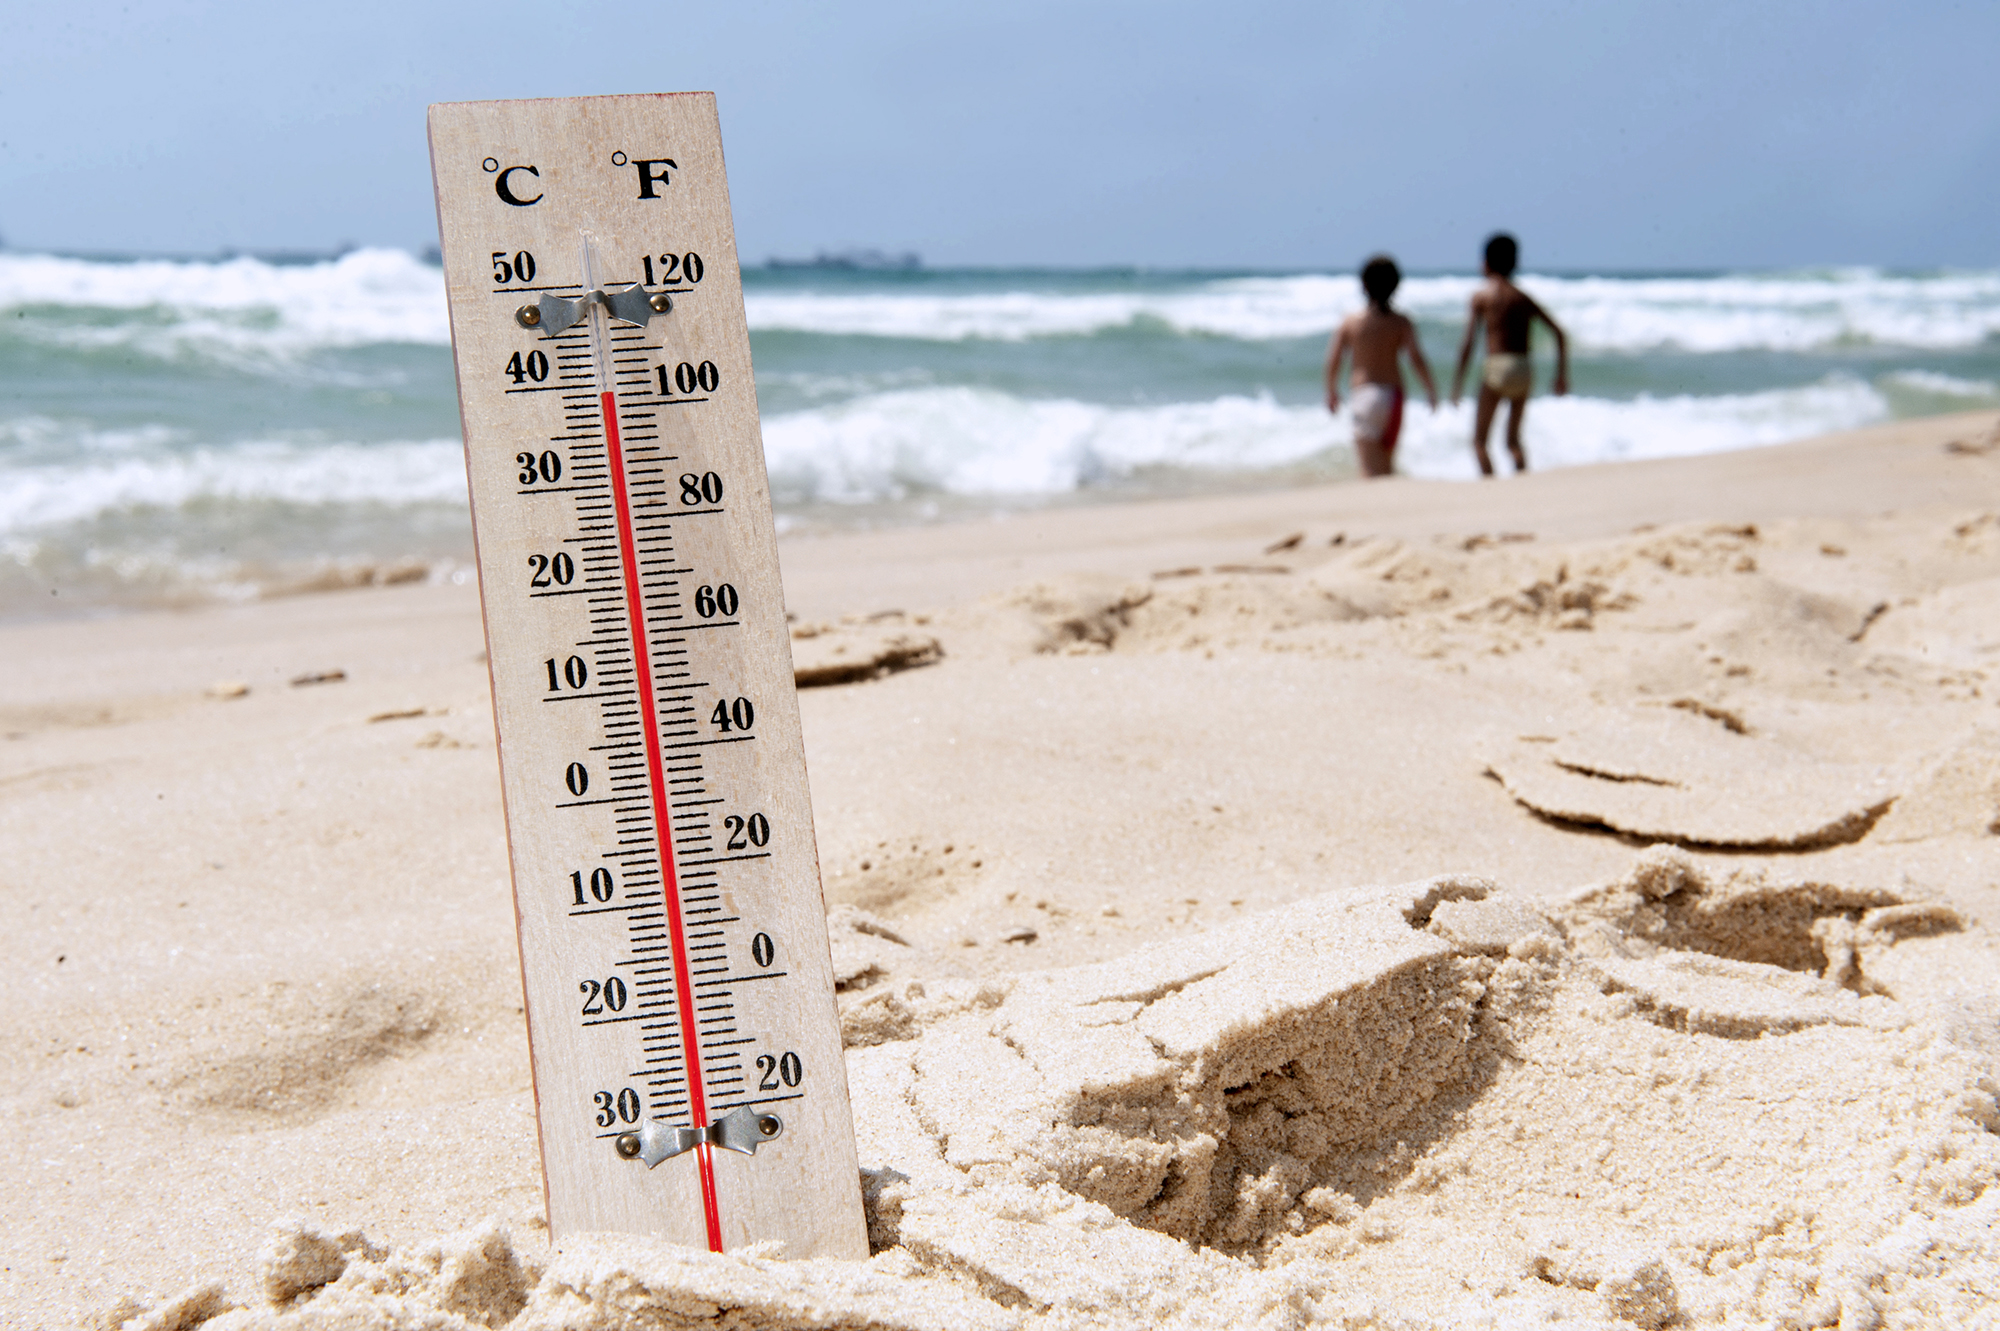 An image of a thermometer on the beach